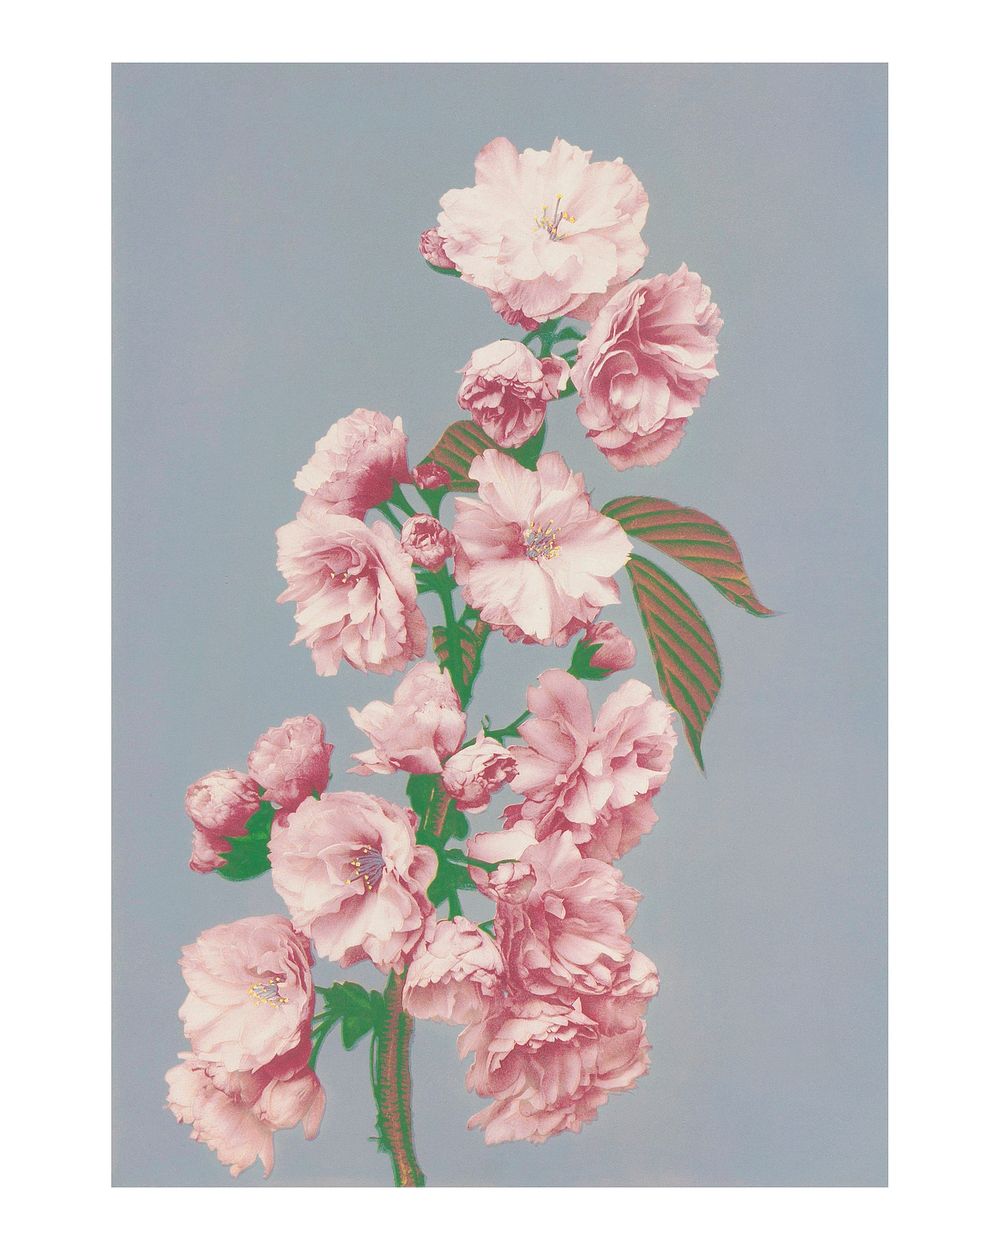 Vintage cherry blossom wall art print and poster design remix from the original artwork.